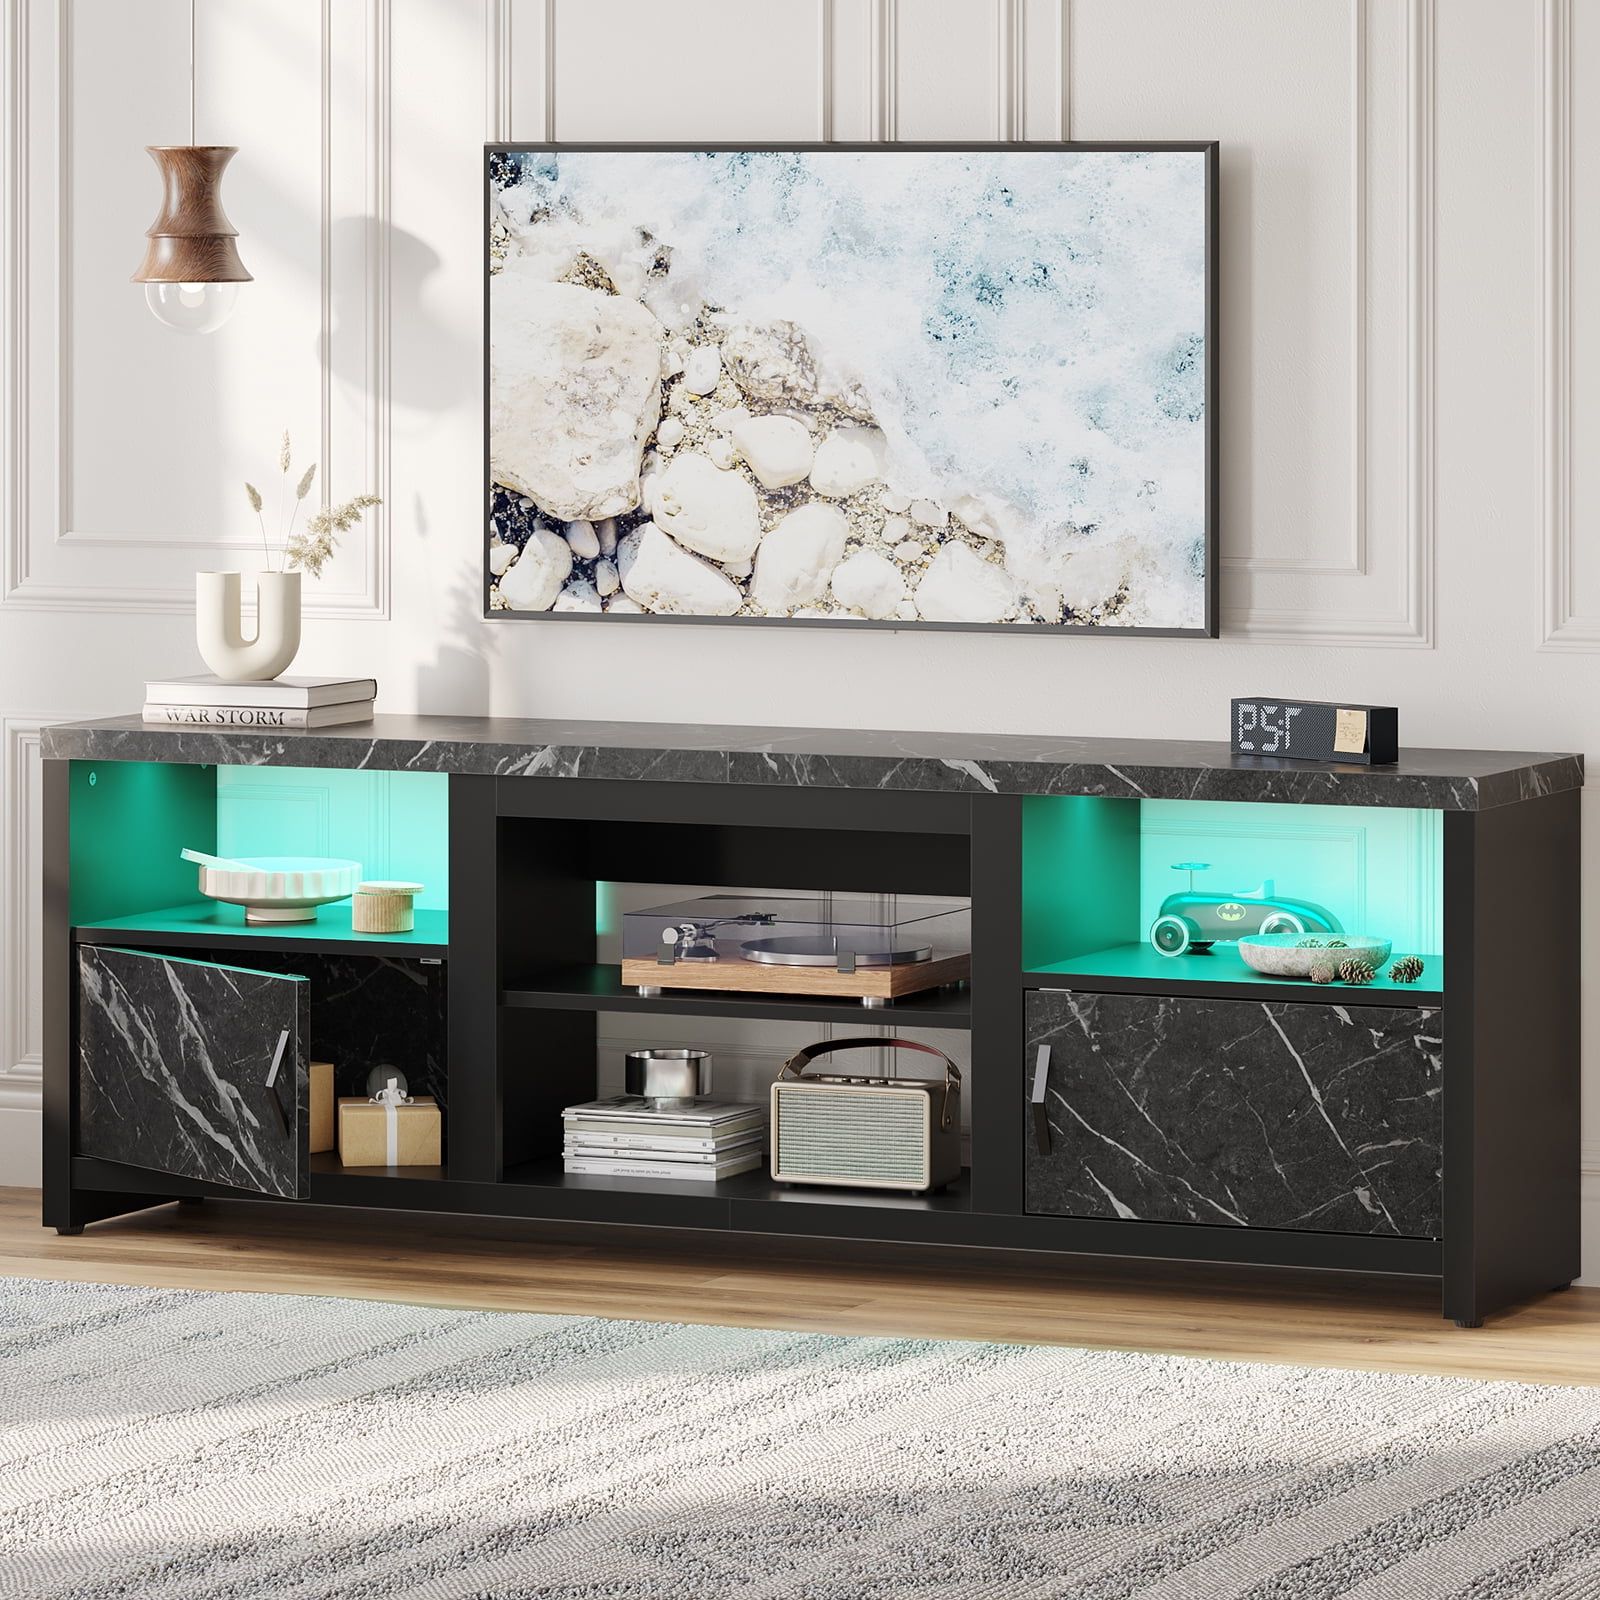 Latest Bestier Modern Tv Stand For Tvs Up To 75" With Led Lights Intended For Bestier Tv Stand For Tvs Up To 75" (Photo 9 of 15)